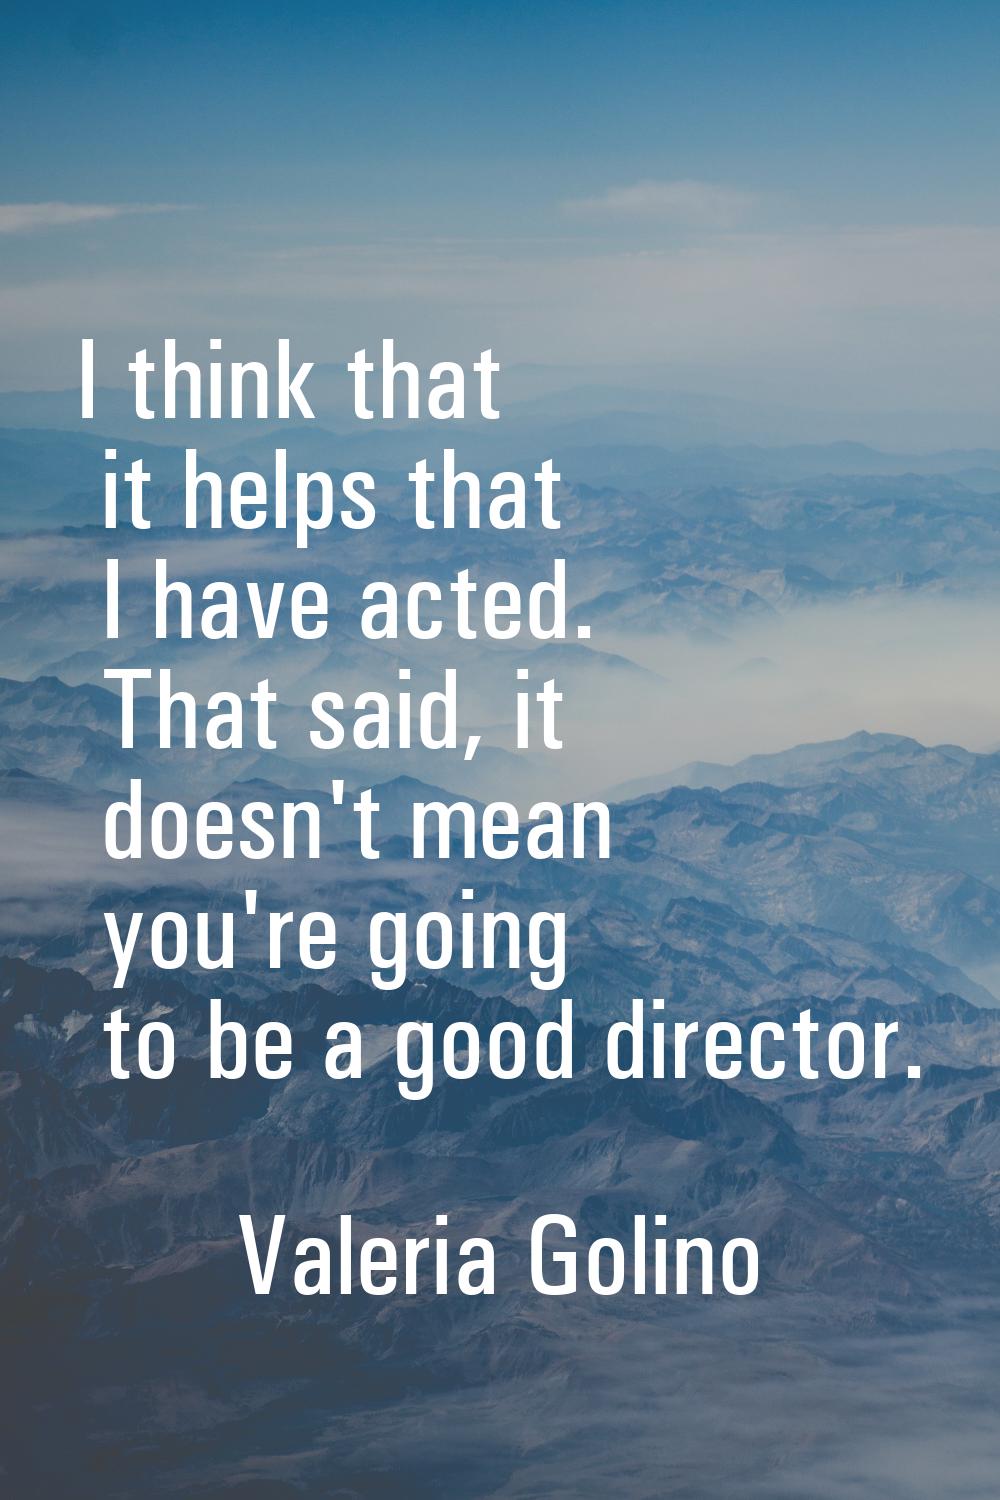 I think that it helps that I have acted. That said, it doesn't mean you're going to be a good direc